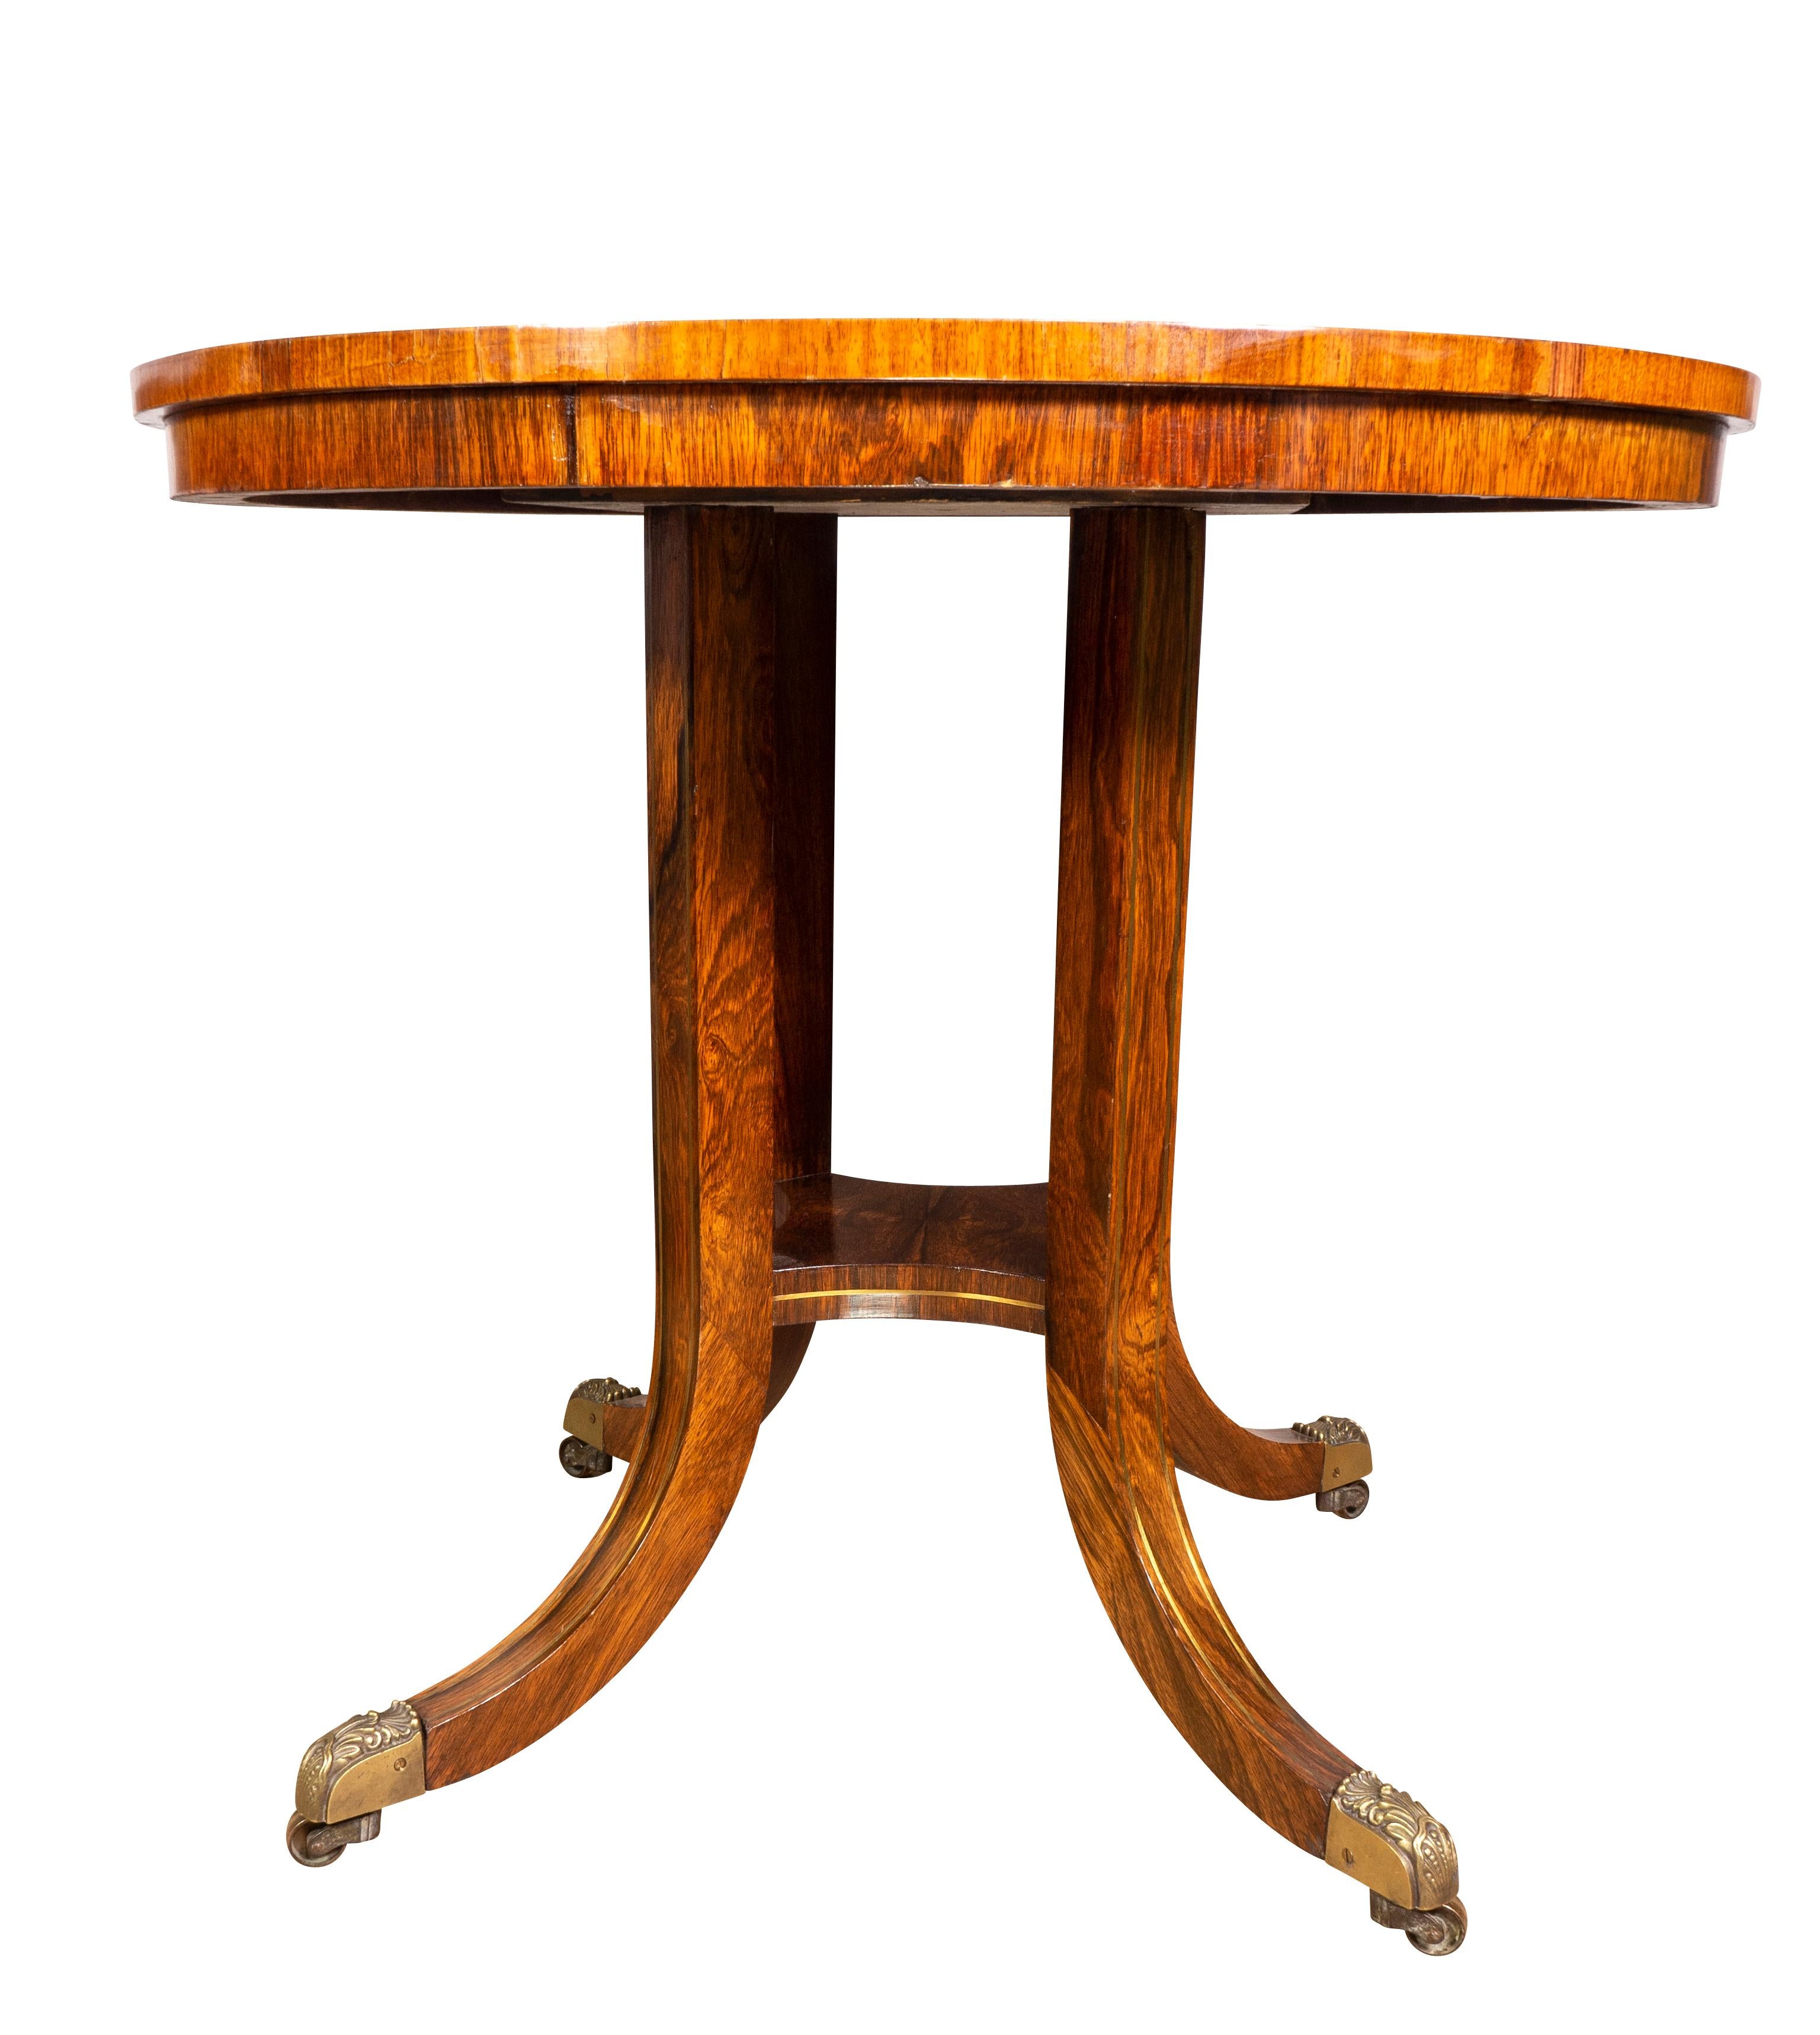 English Pair of Regency Style Rosewood and Brass Inlaid Tables